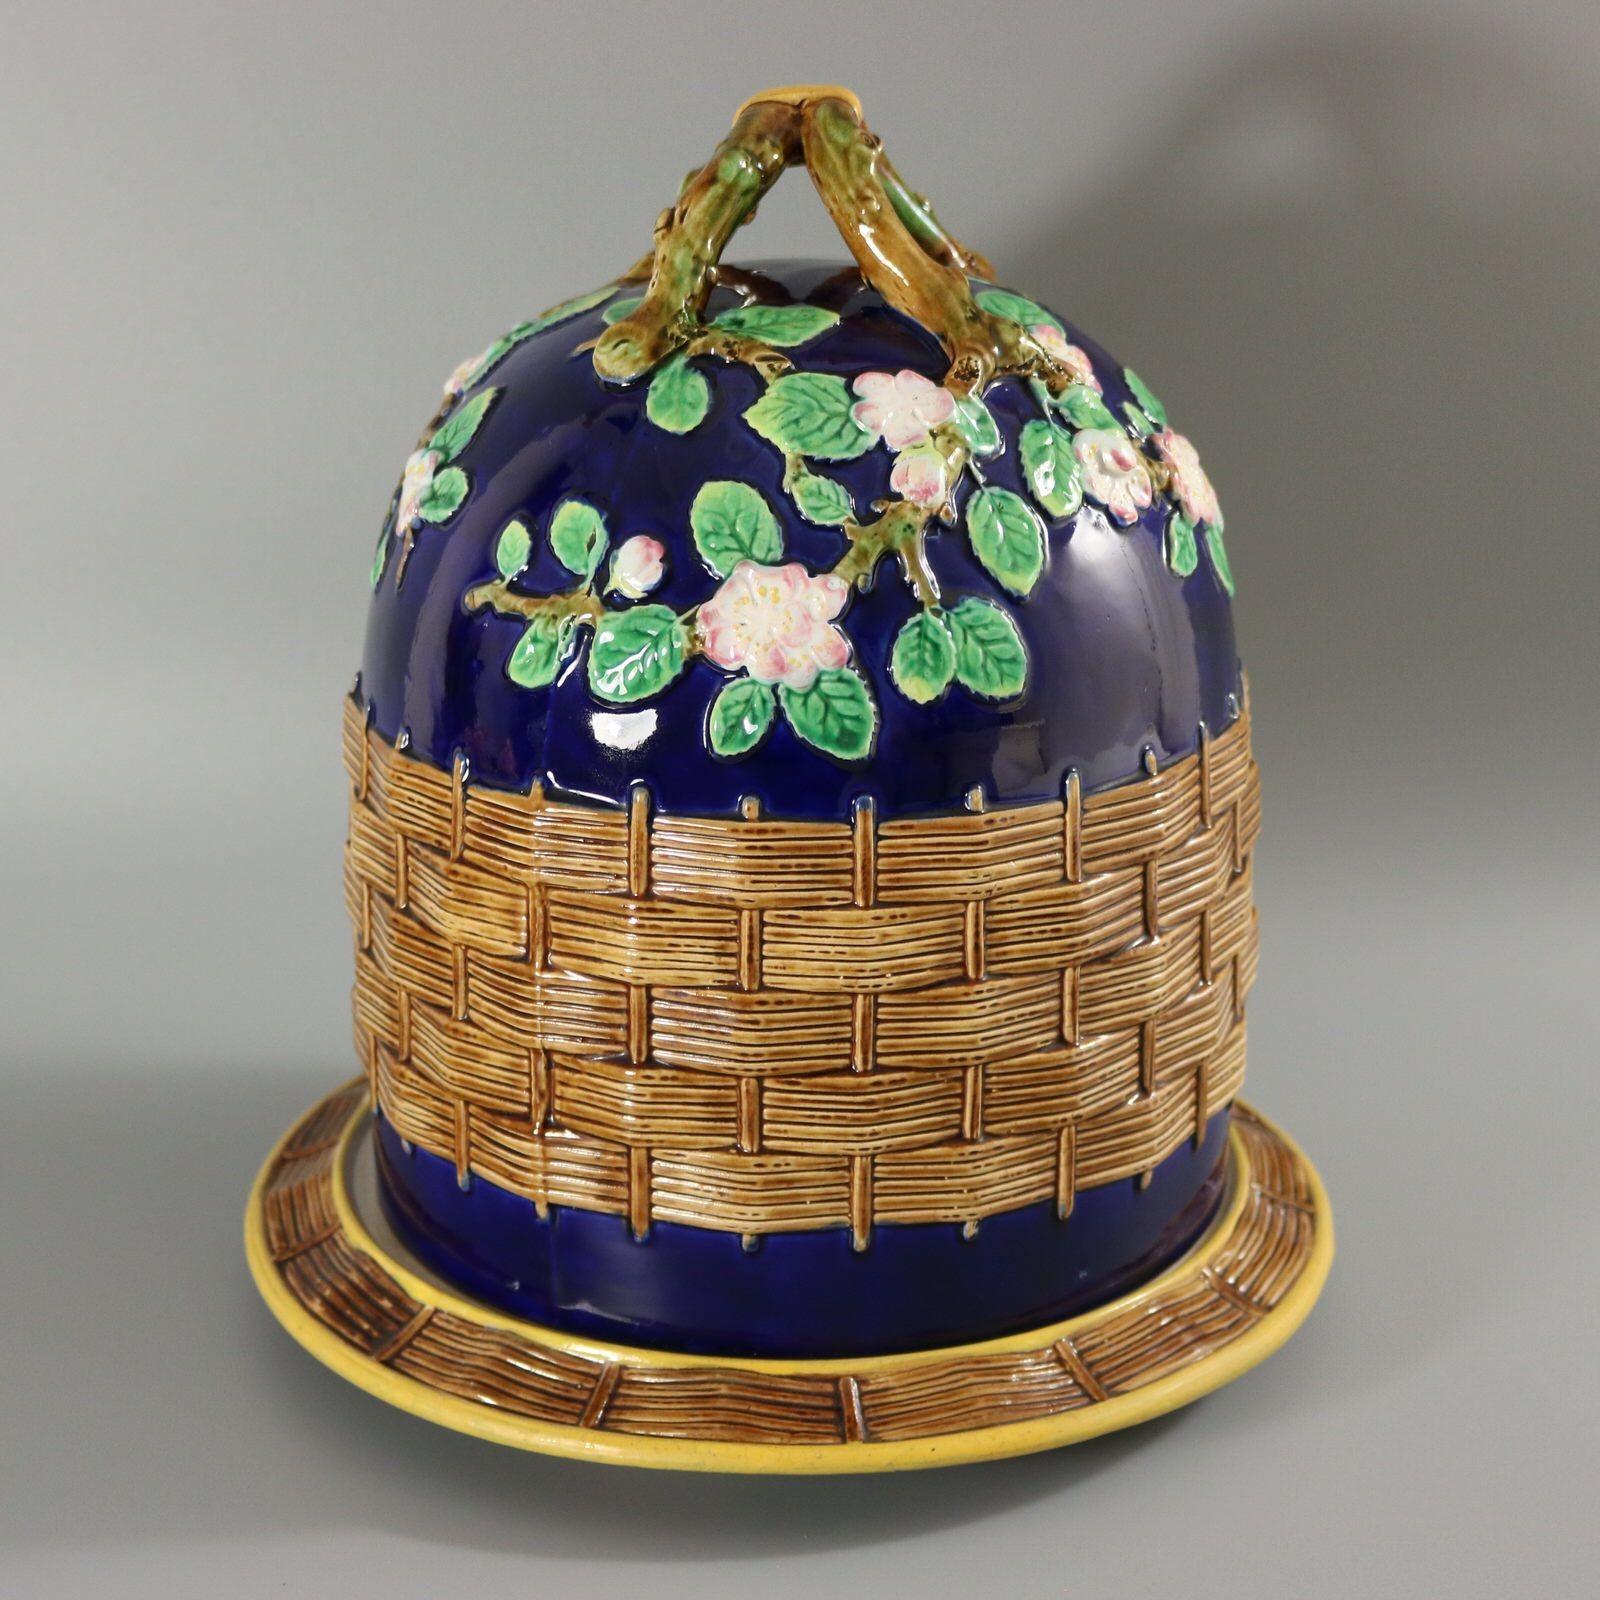 George Jones Majolica cheese keep which features a branch handle with apple blossoms. Basketweave to the sides. Cobalt blue ground version. Colouration: cobalt blue, brown, green, are predominant. The piece bears maker's marks for the George Jones